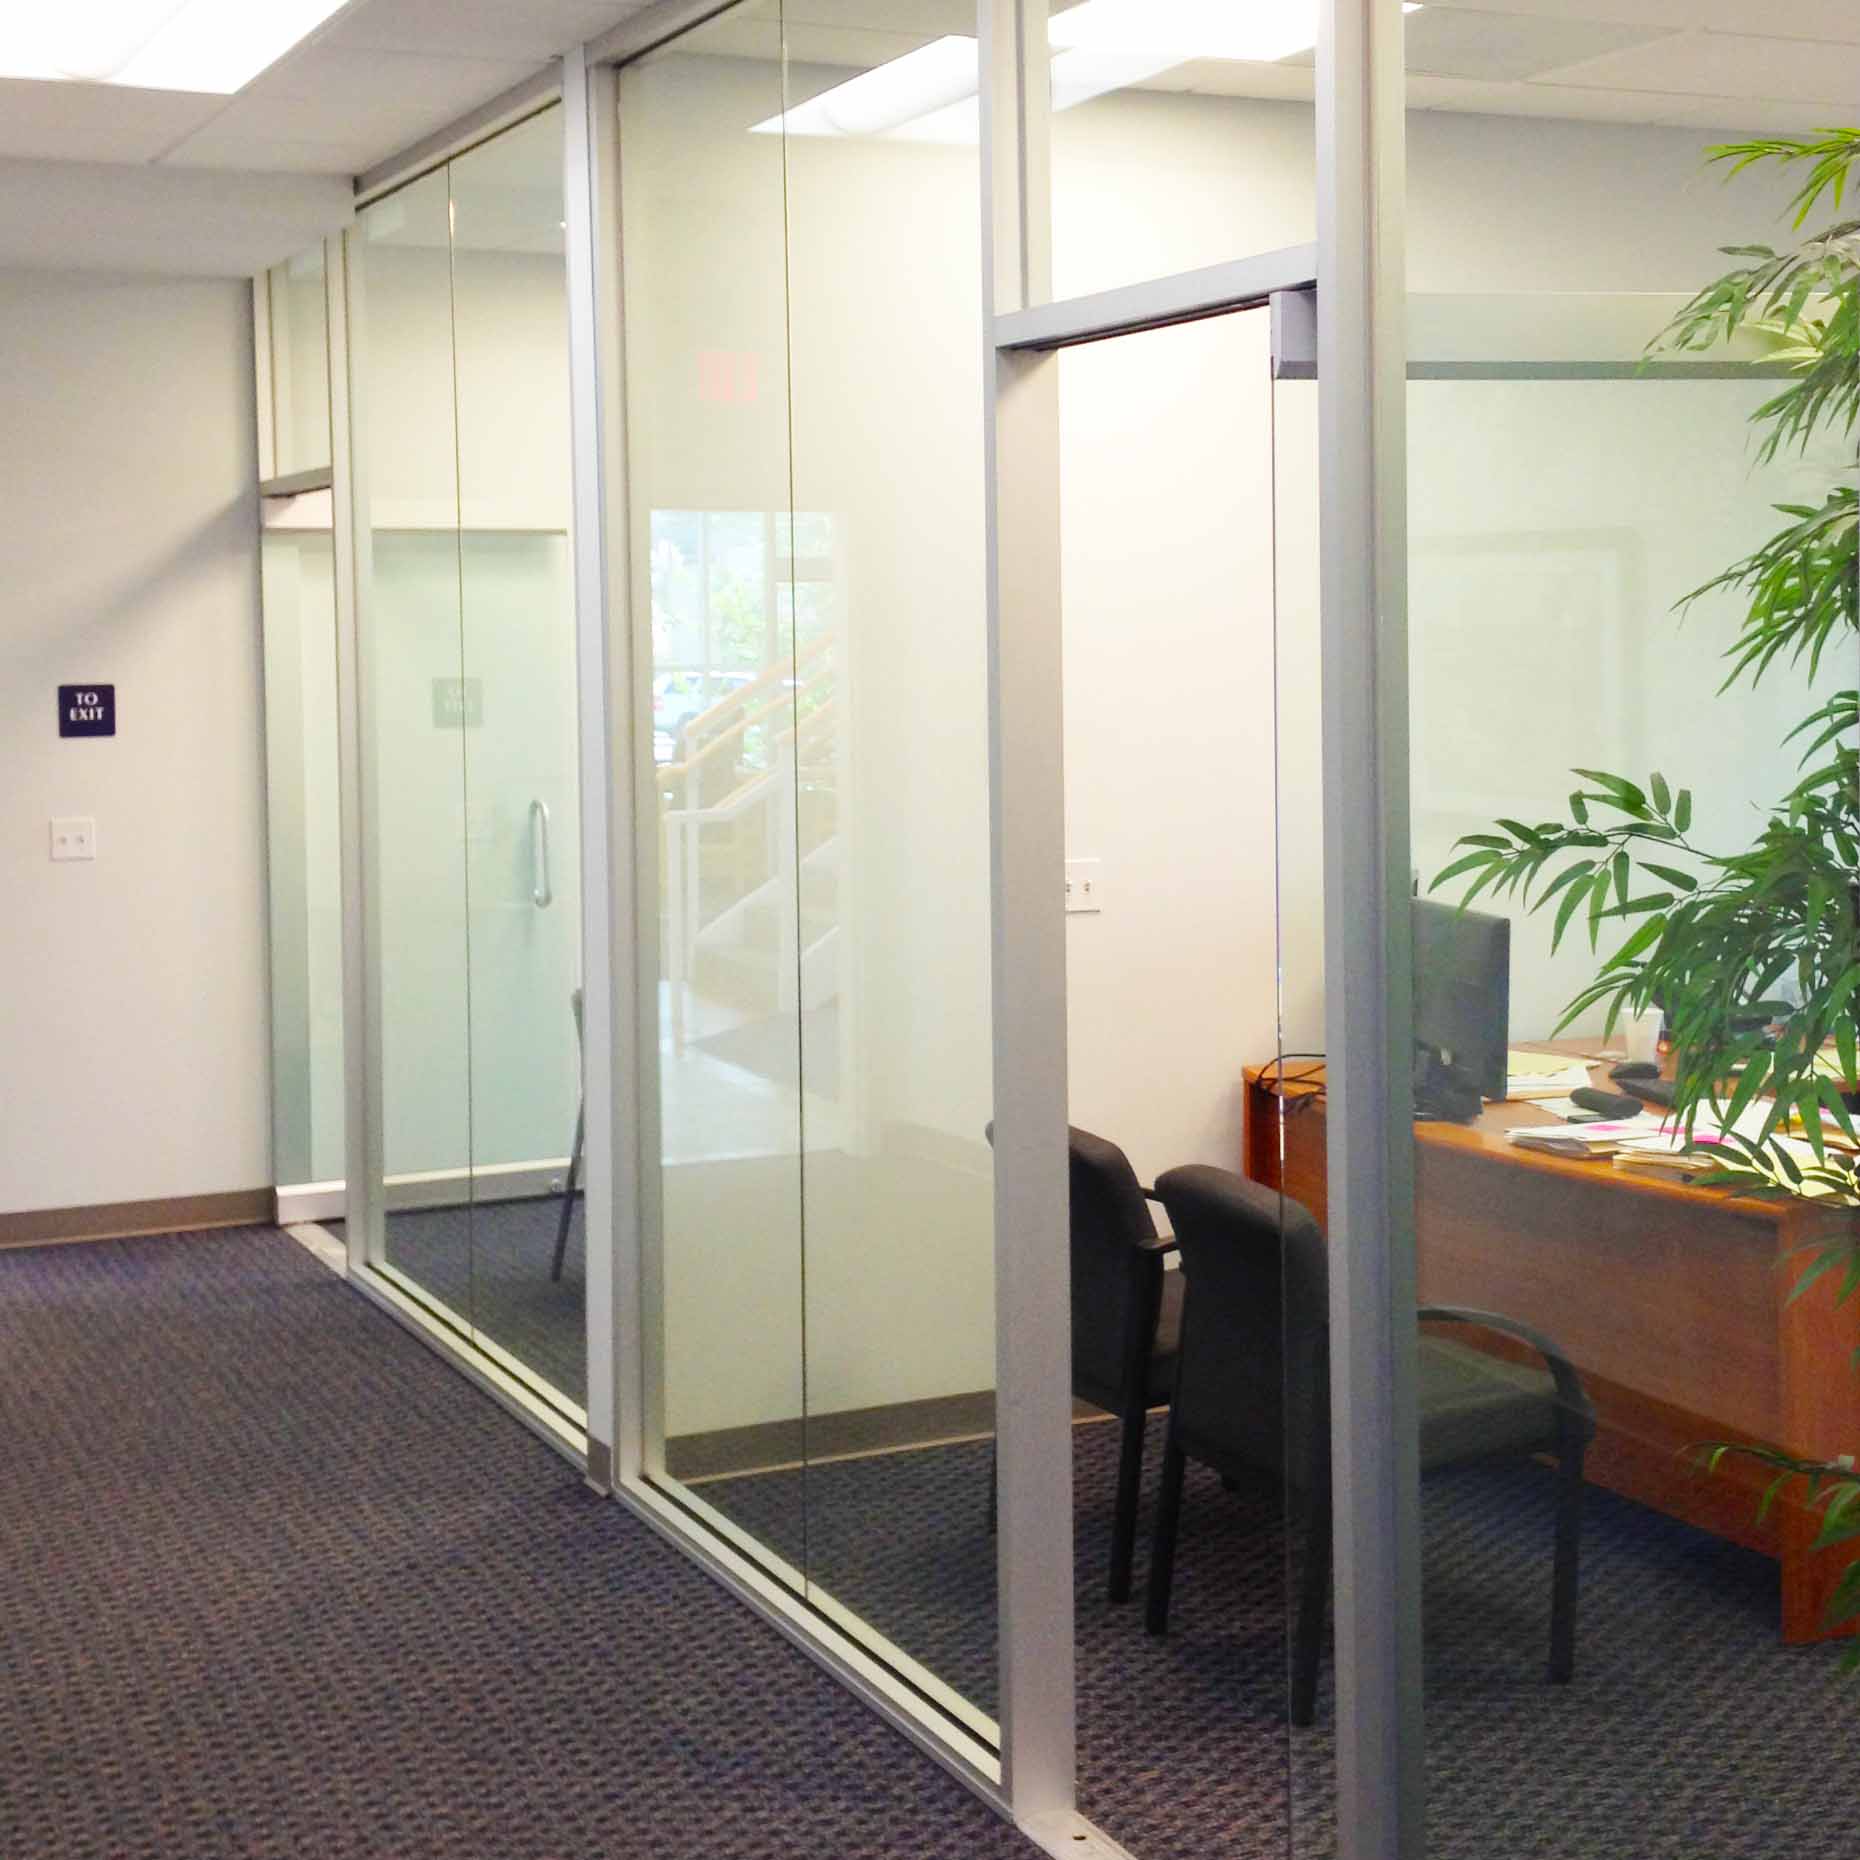 Offices separated by clear glass panels makes the floor look more spacious.